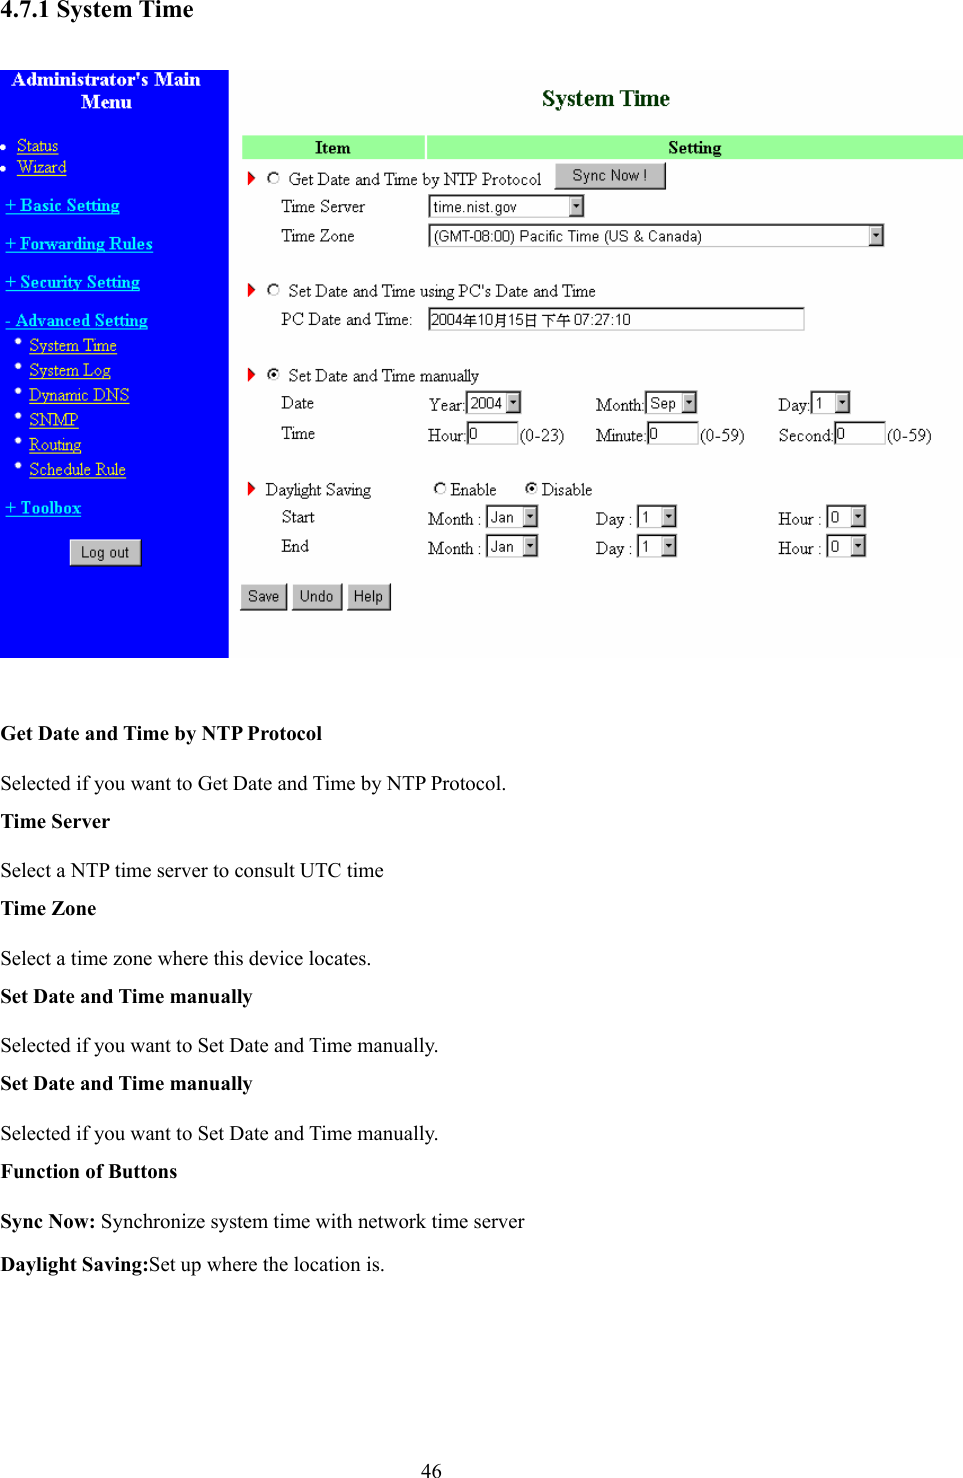  464.7.1 System Time    Get Date and Time by NTP Protocol Selected if you want to Get Date and Time by NTP Protocol.   Time Server Select a NTP time server to consult UTC time   Time Zone Select a time zone where this device locates.   Set Date and Time manually Selected if you want to Set Date and Time manually.   Set Date and Time manually Selected if you want to Set Date and Time manually. Function of Buttons Sync Now: Synchronize system time with network time server Daylight Saving:Set up where the location is.  